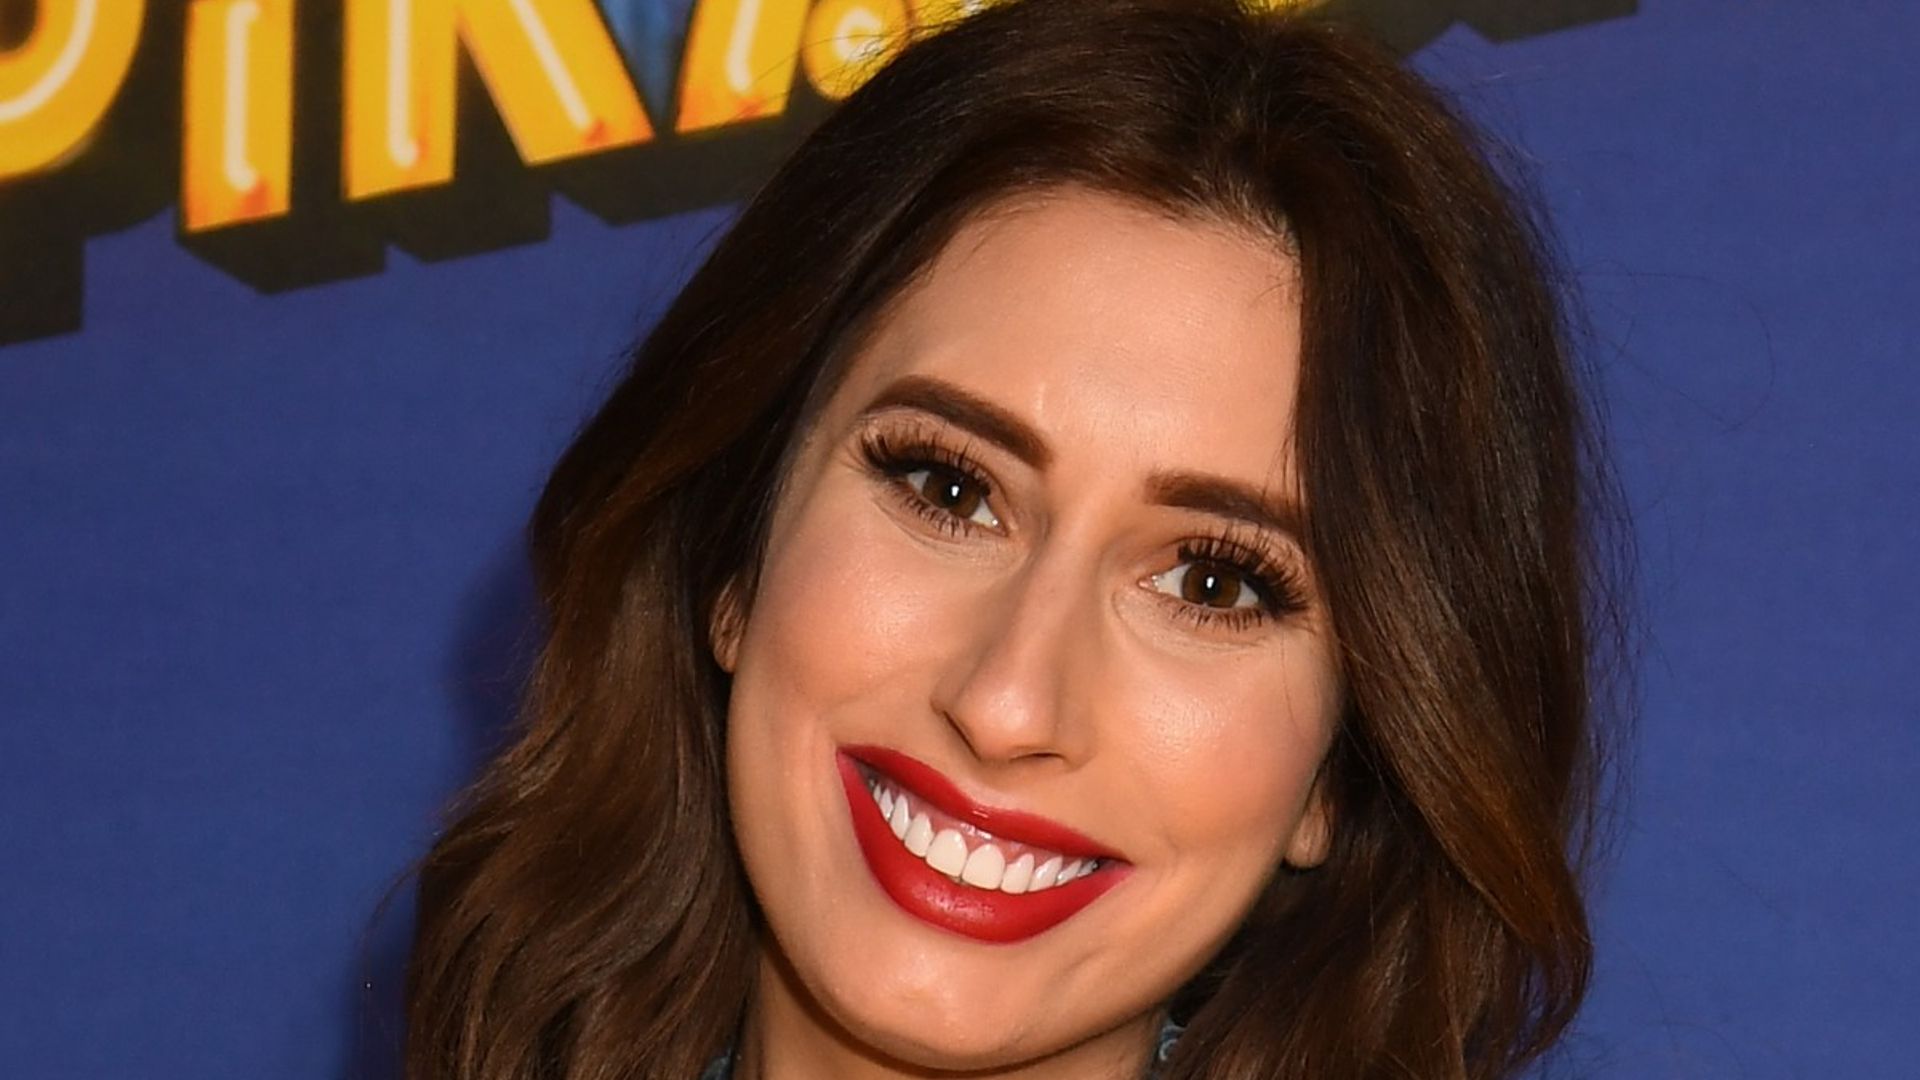 stacey solomon close up smiling